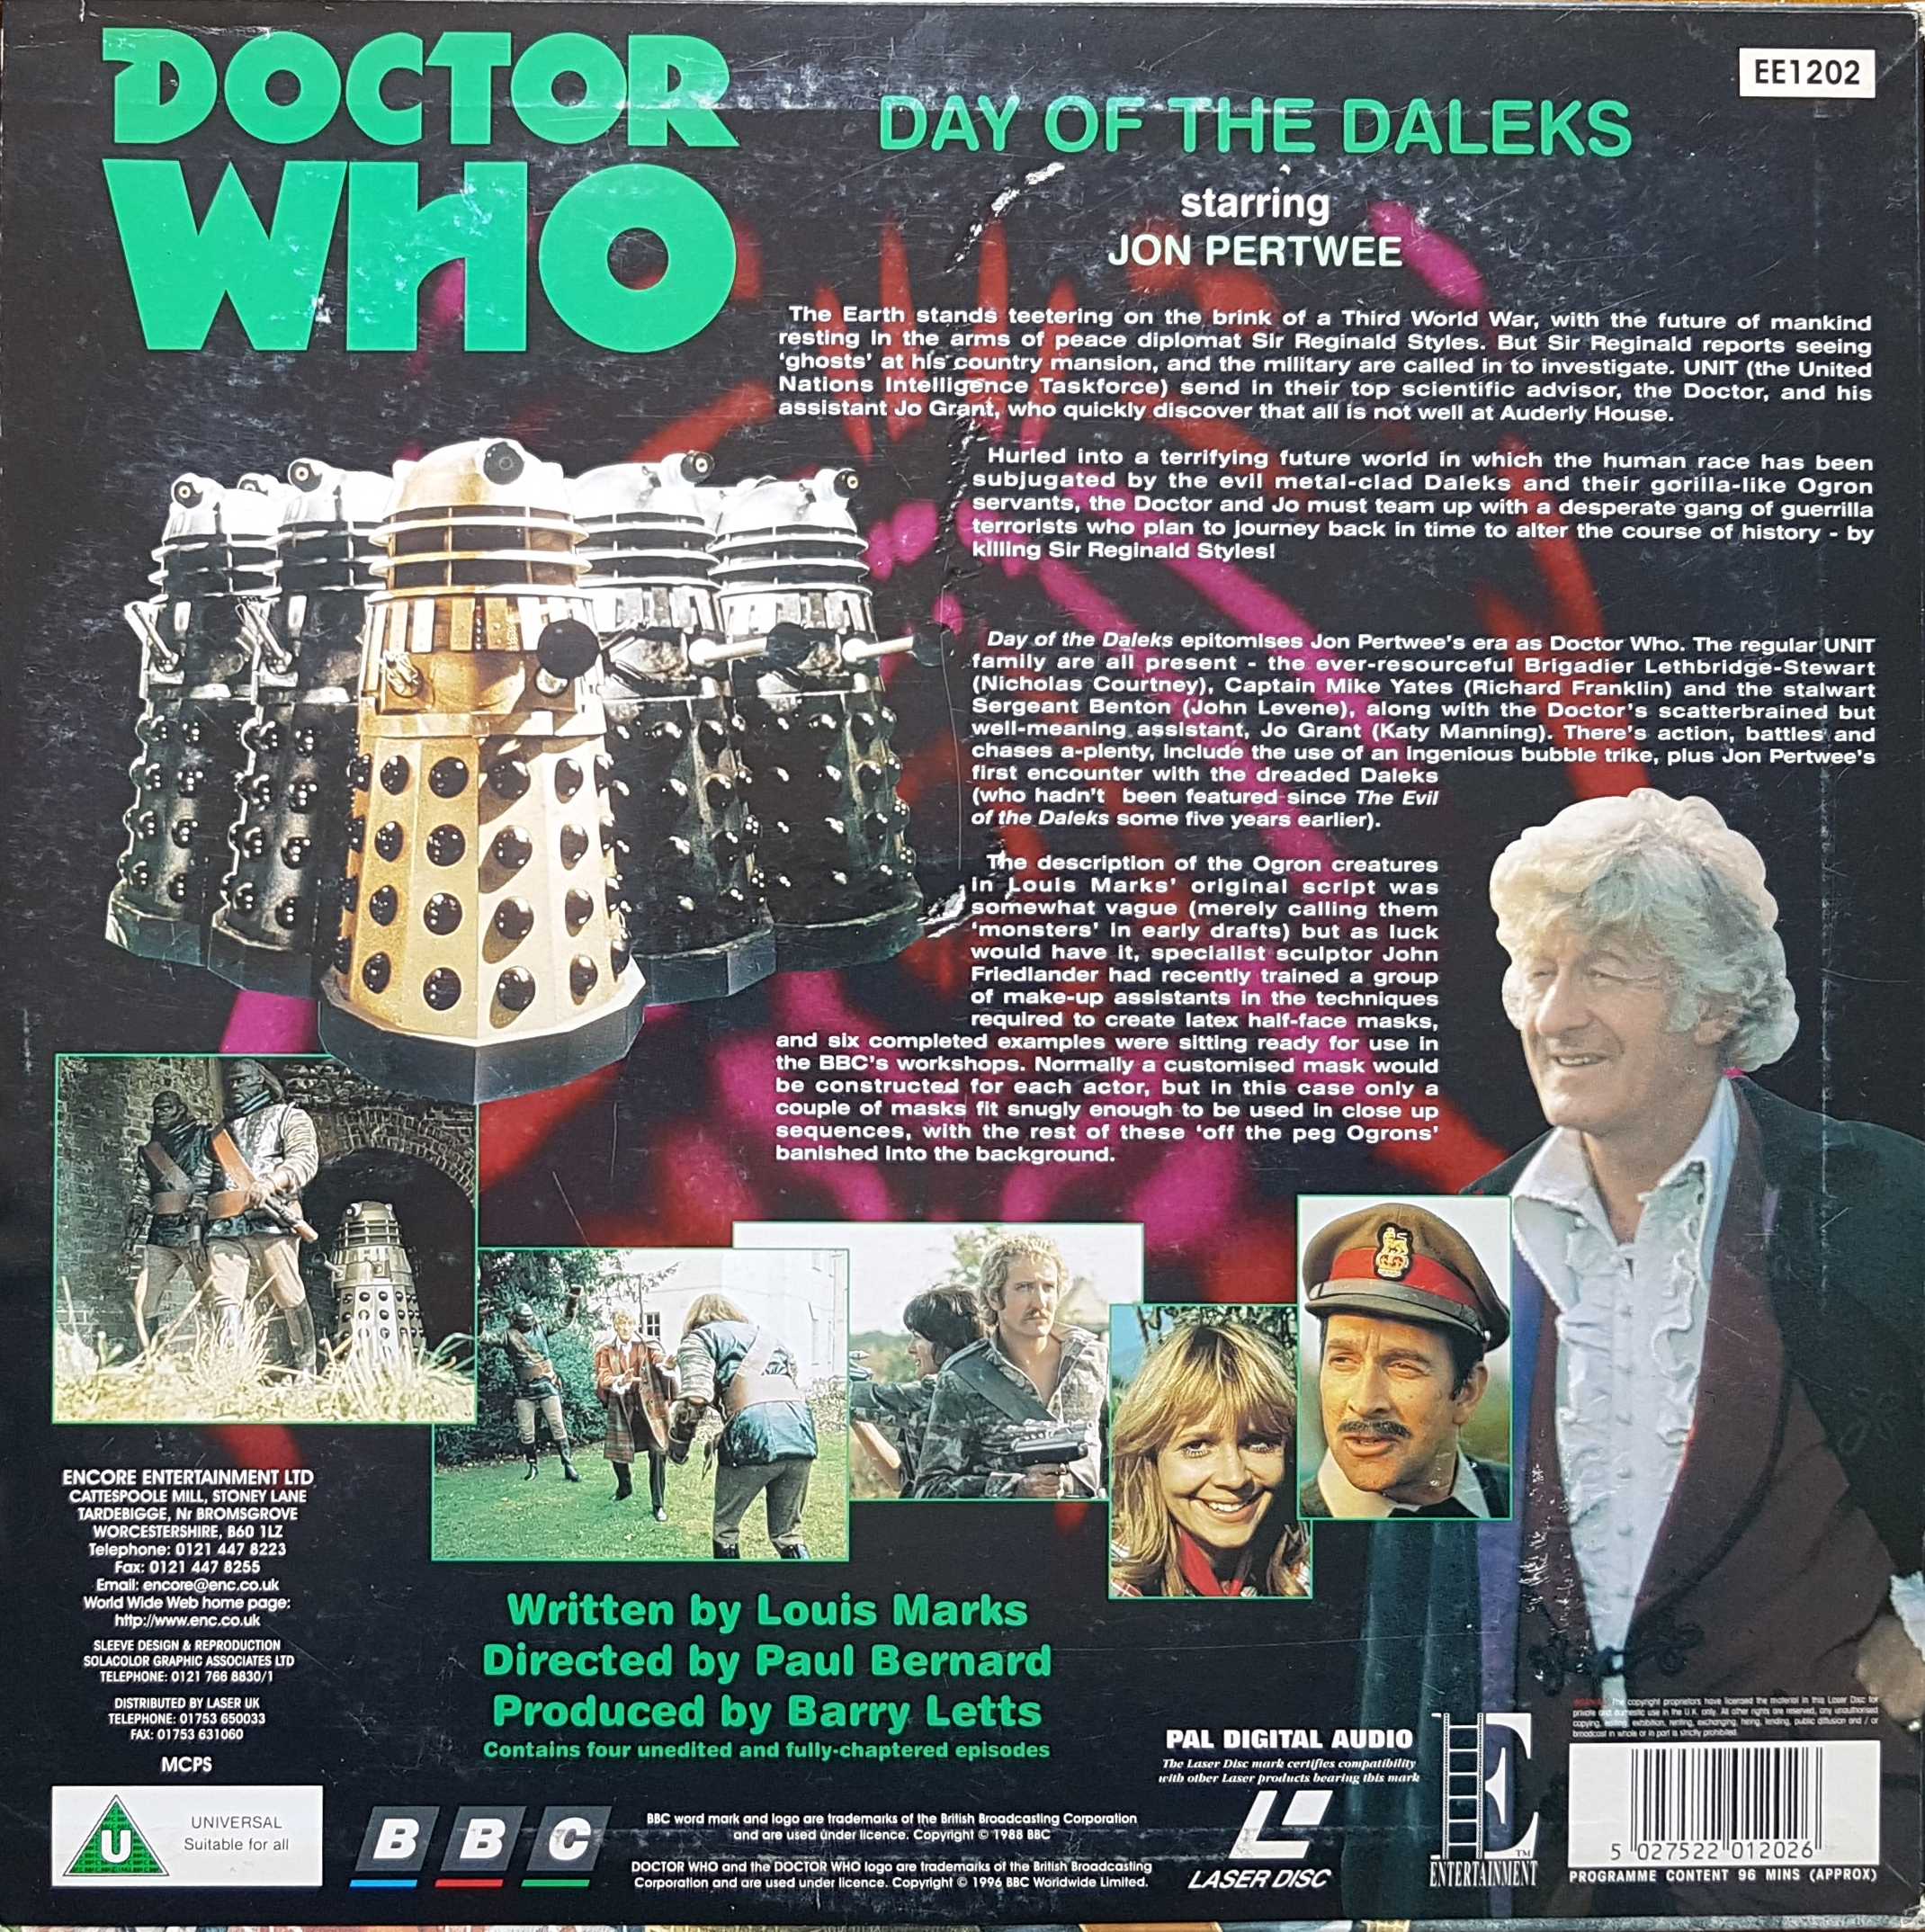 Picture of EE 1202 Doctor Who - The day of the Daleks by artist Louis Marks from the BBC records and Tapes library